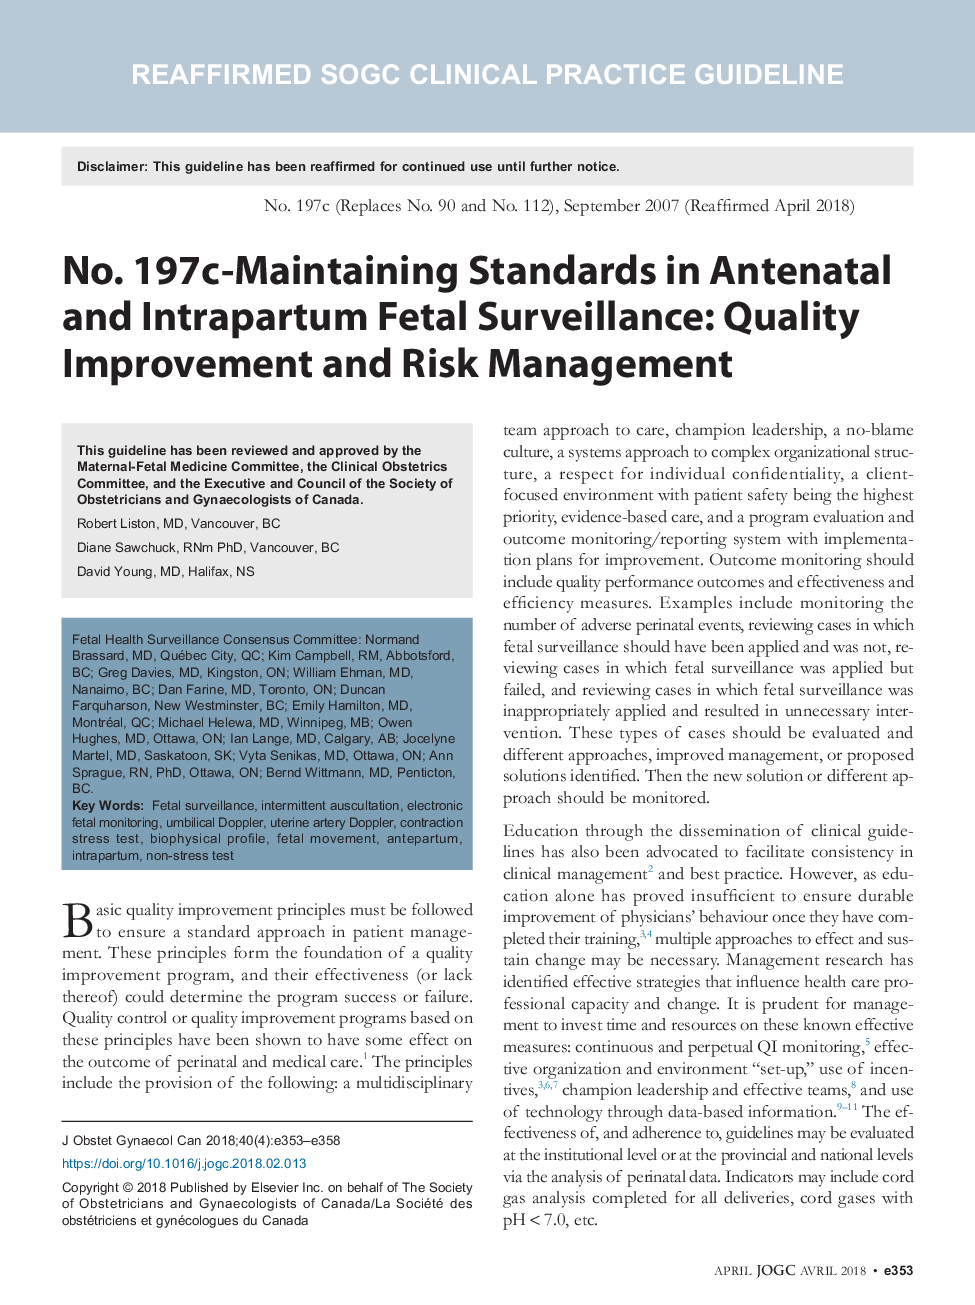 No. 197c-Maintaining Standards in Antenatal and Intrapartum Fetal Surveillance: Quality Improvement and Risk Management